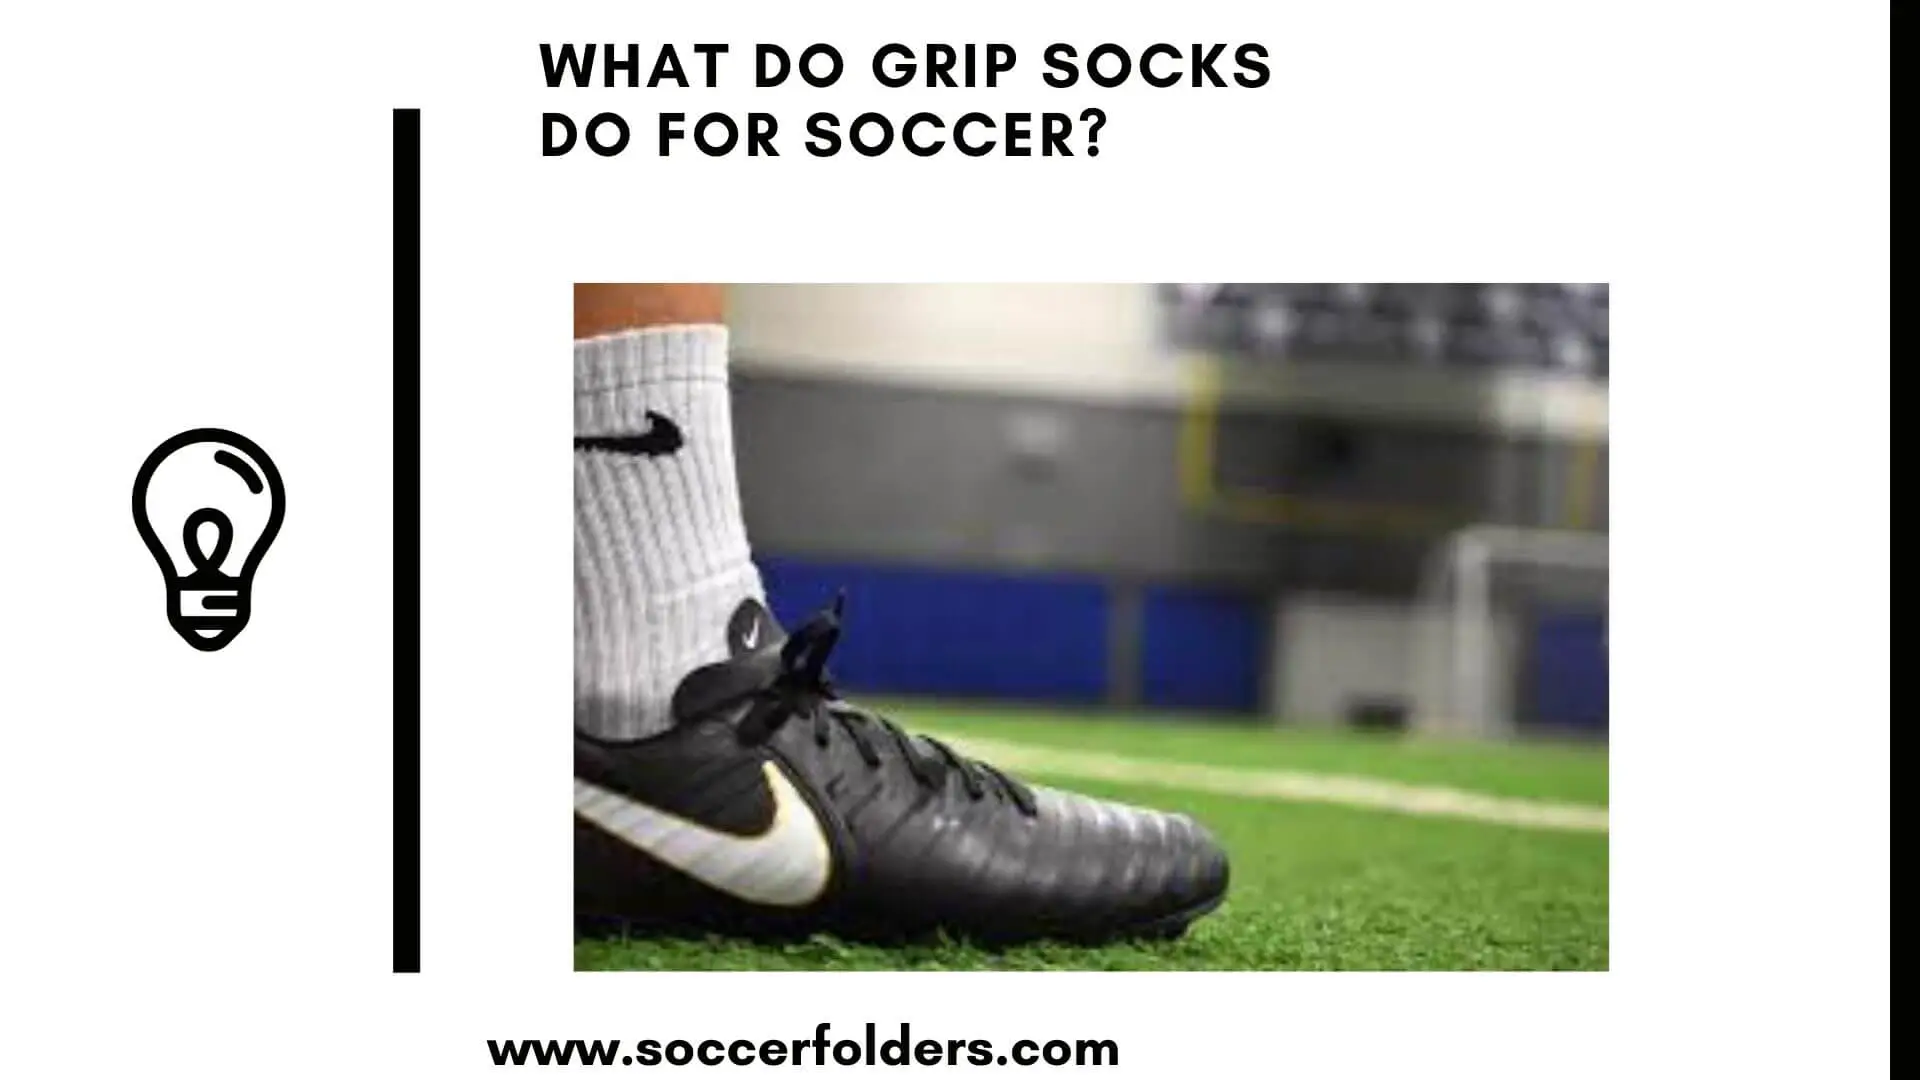 What do grip socks do for soccer - Featured image